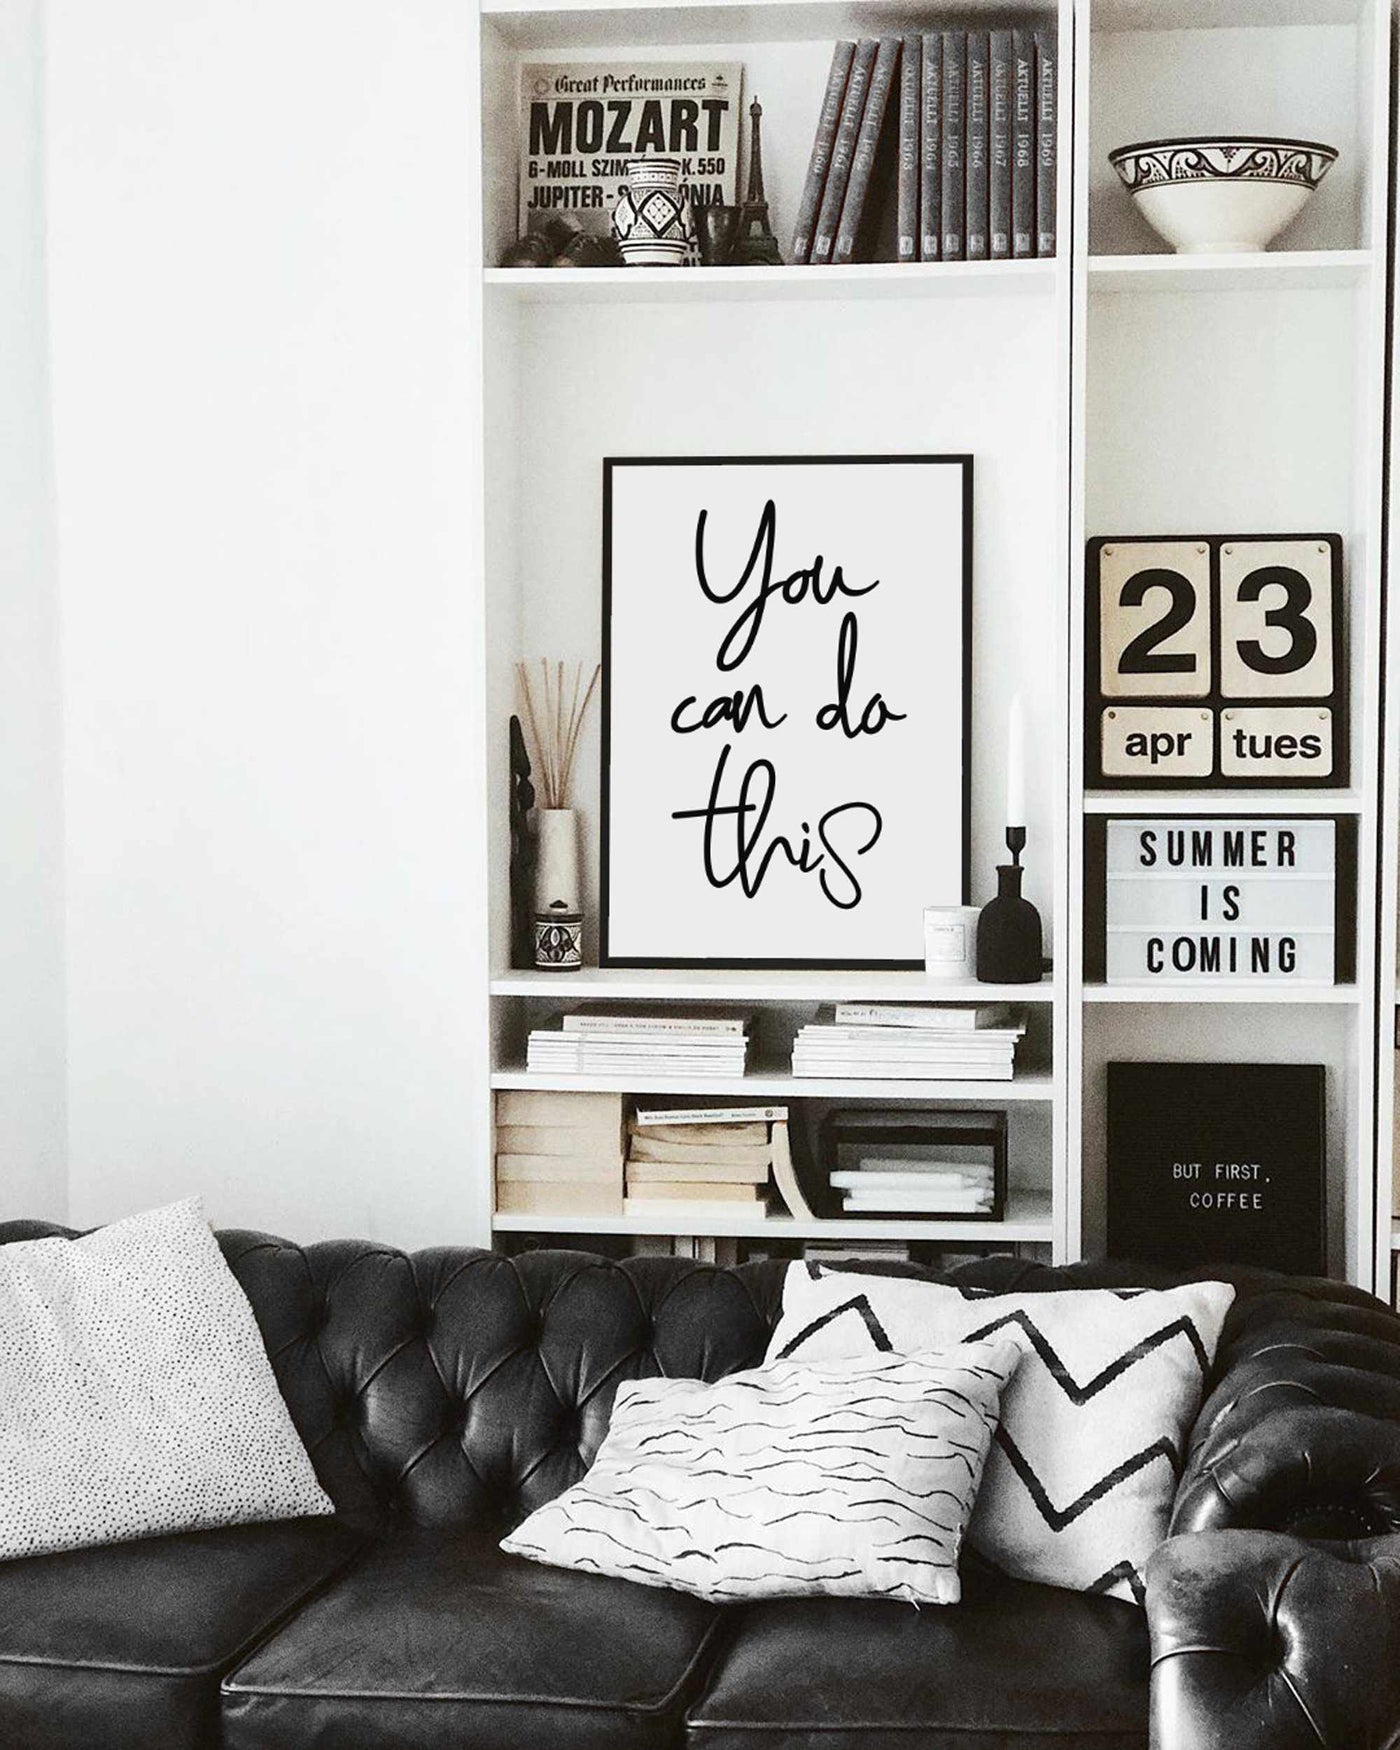 Typographic Wall Art Print 'You Can Do This 2.0'